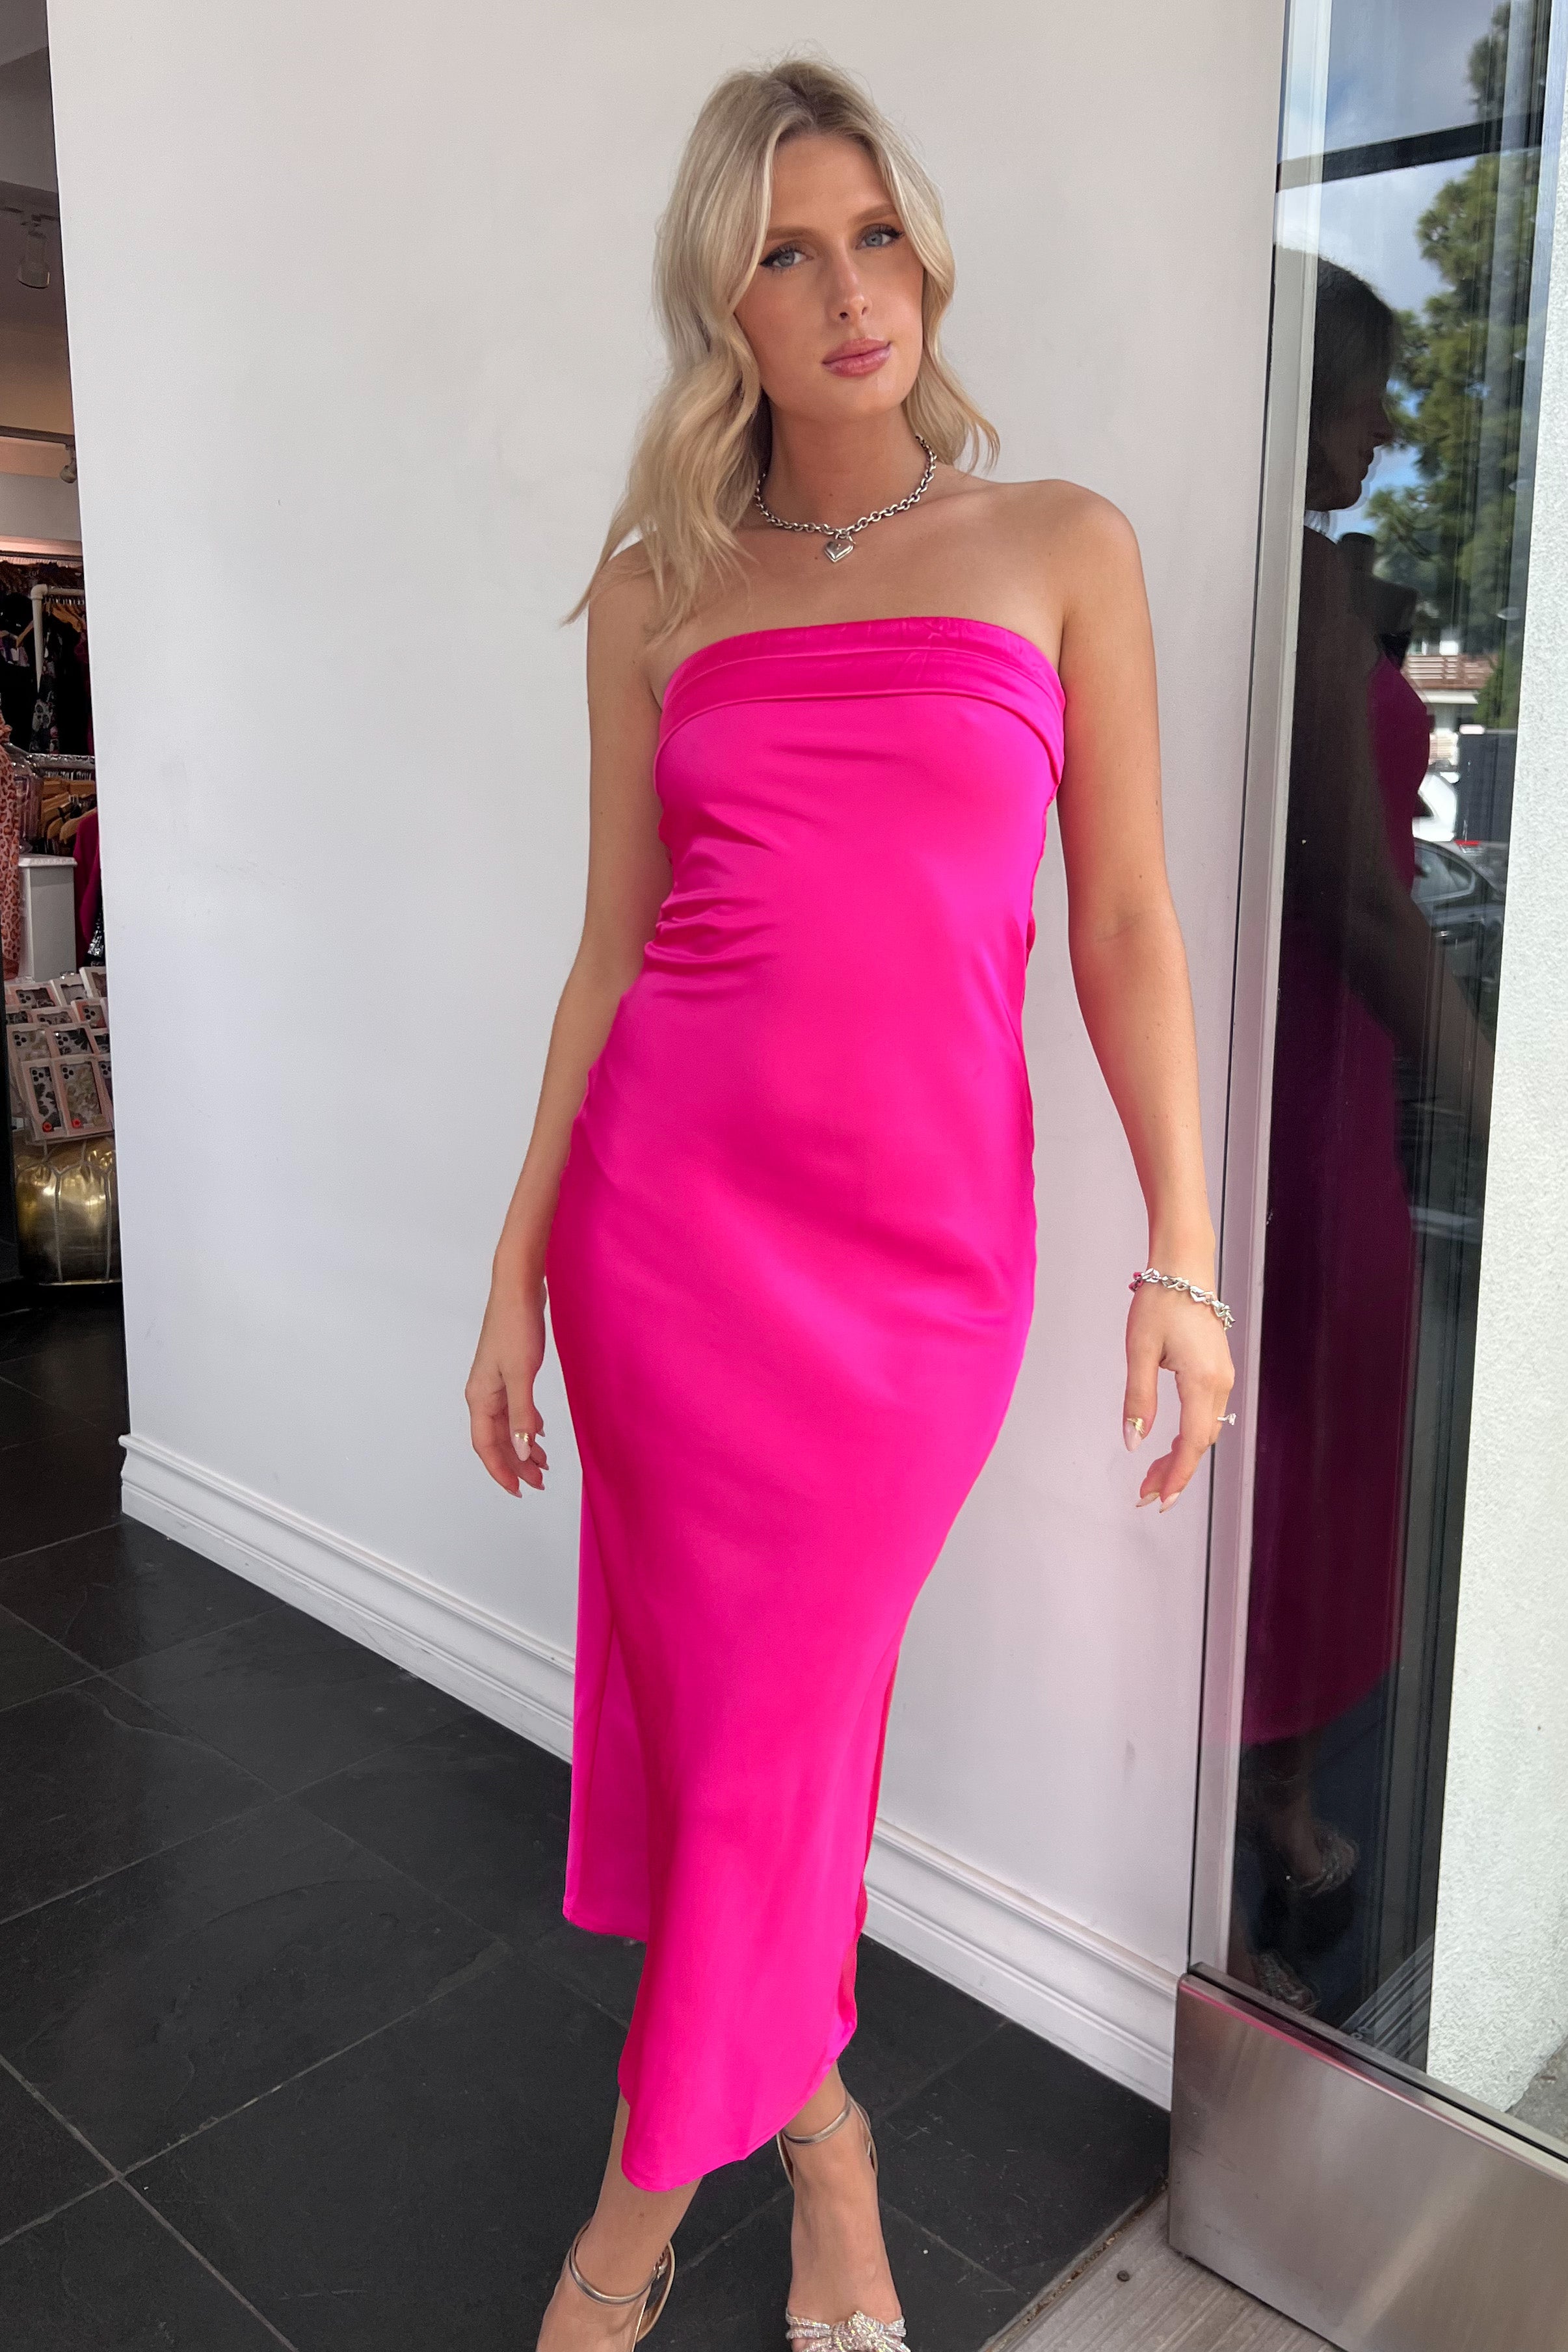 I'm On Fire For You Dress-Barbie Pink